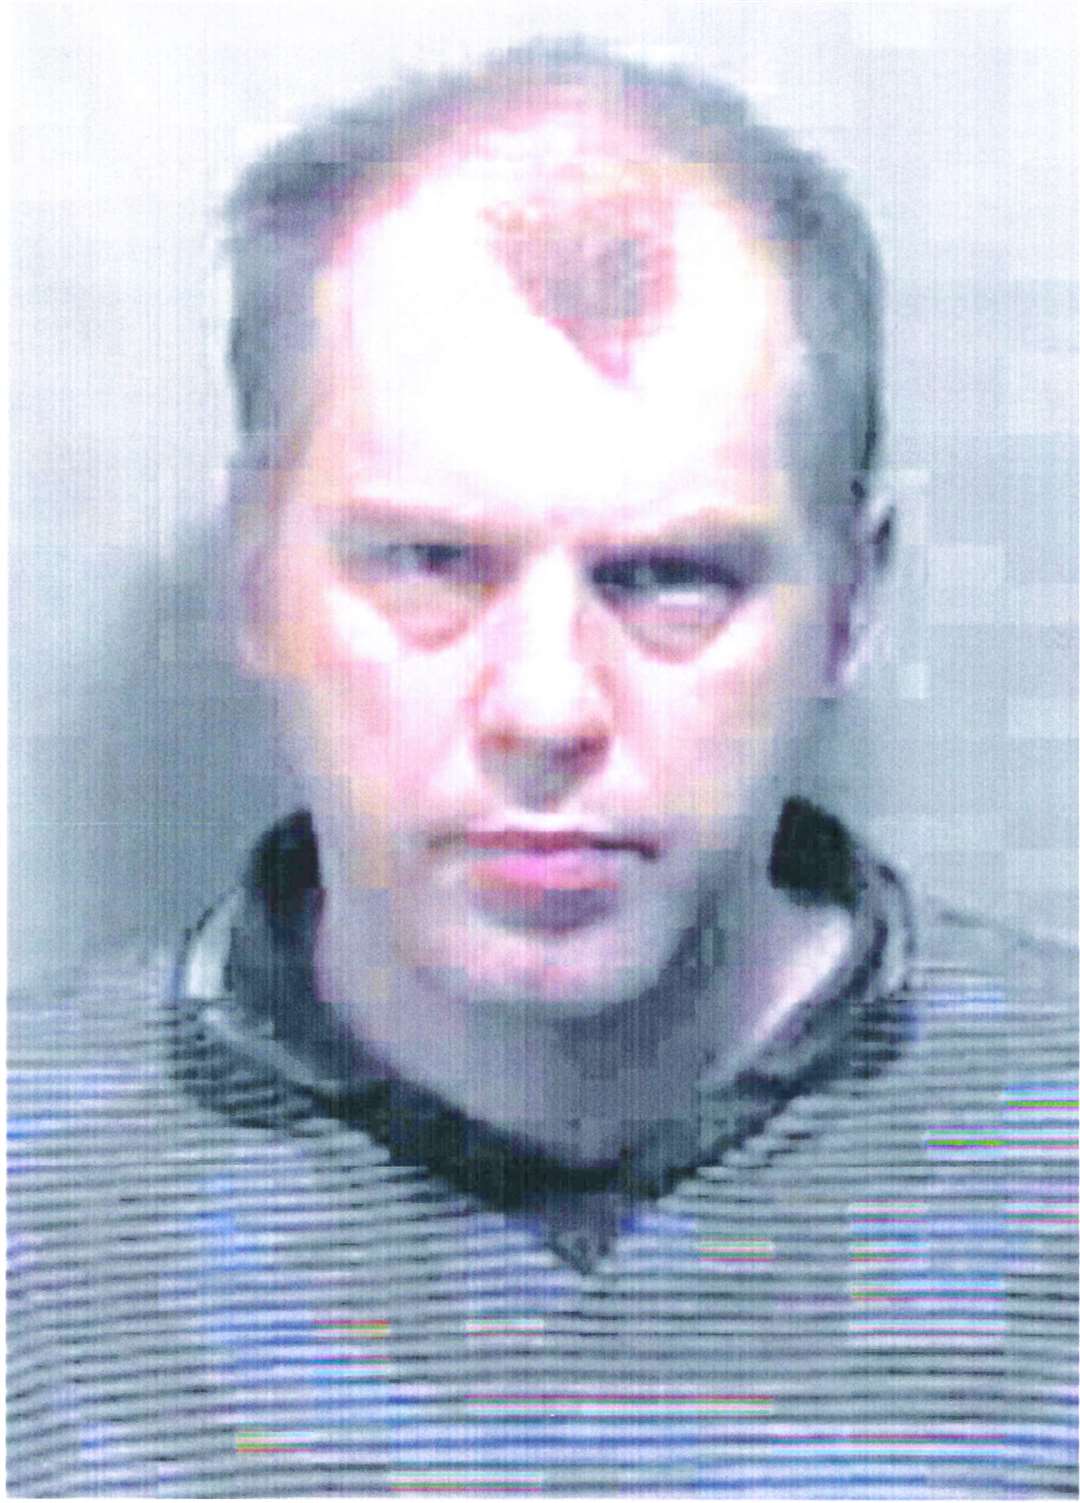 Michael Stone was found guilty at Maidstone Crown Court